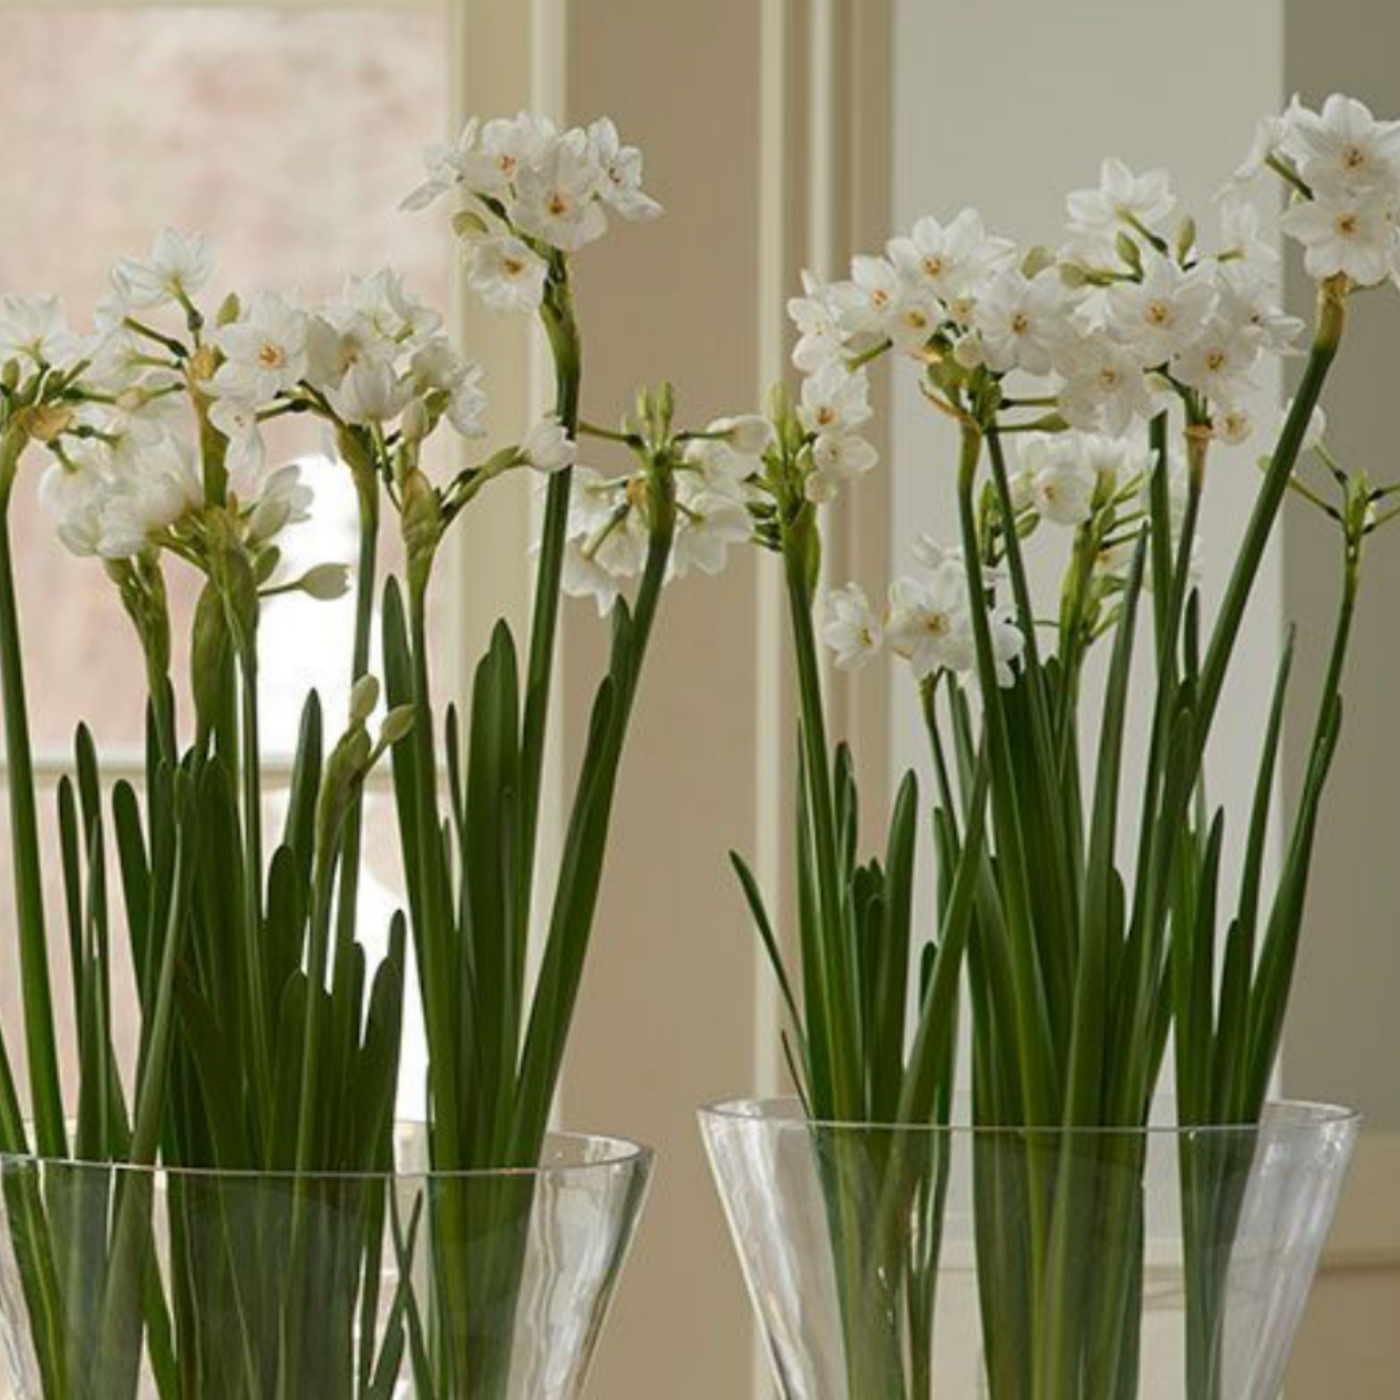 Paperwhite bulbs in the Glass vase